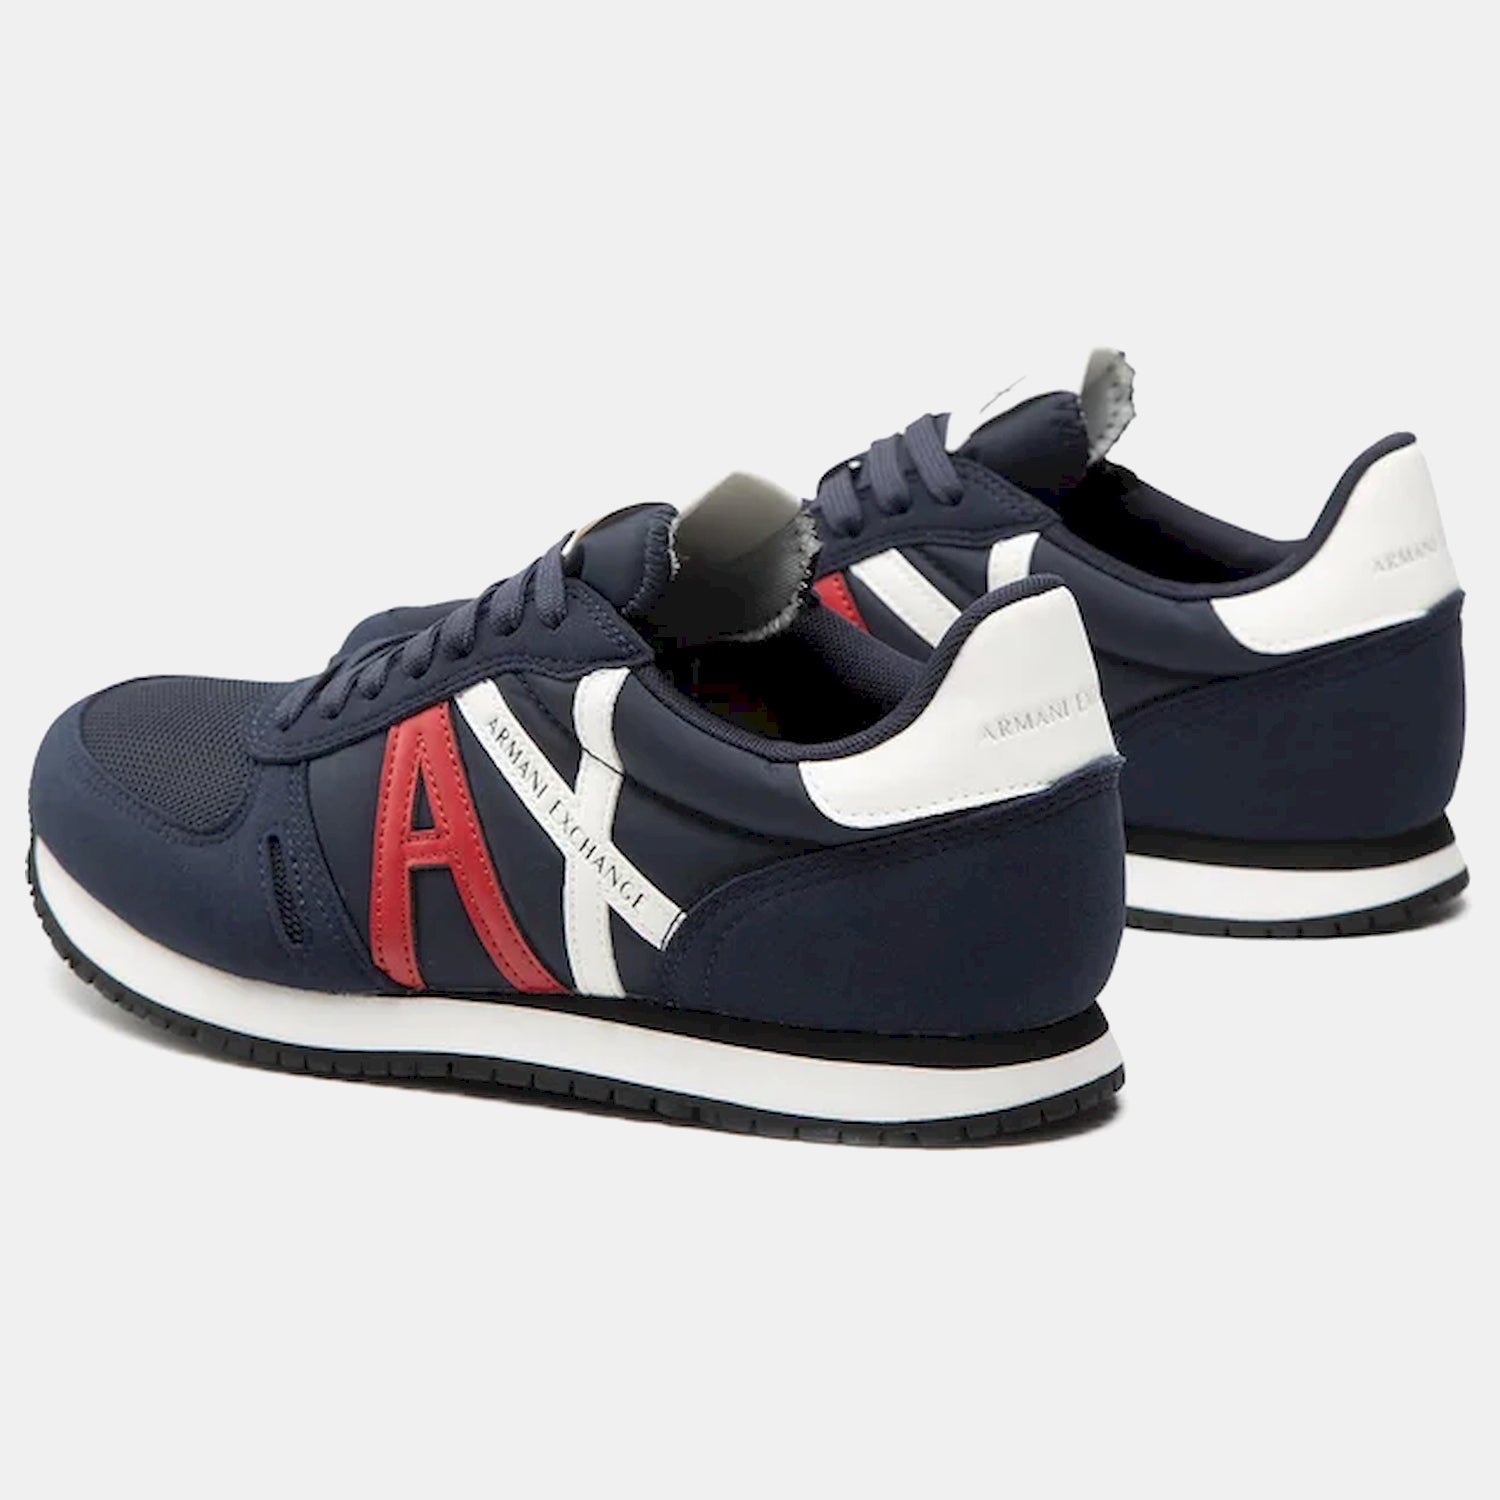 Armani Exchange Sapatilhas Sneakers Shoes Xux017 Xv028 Navy Red Navy Vermelho_shot2